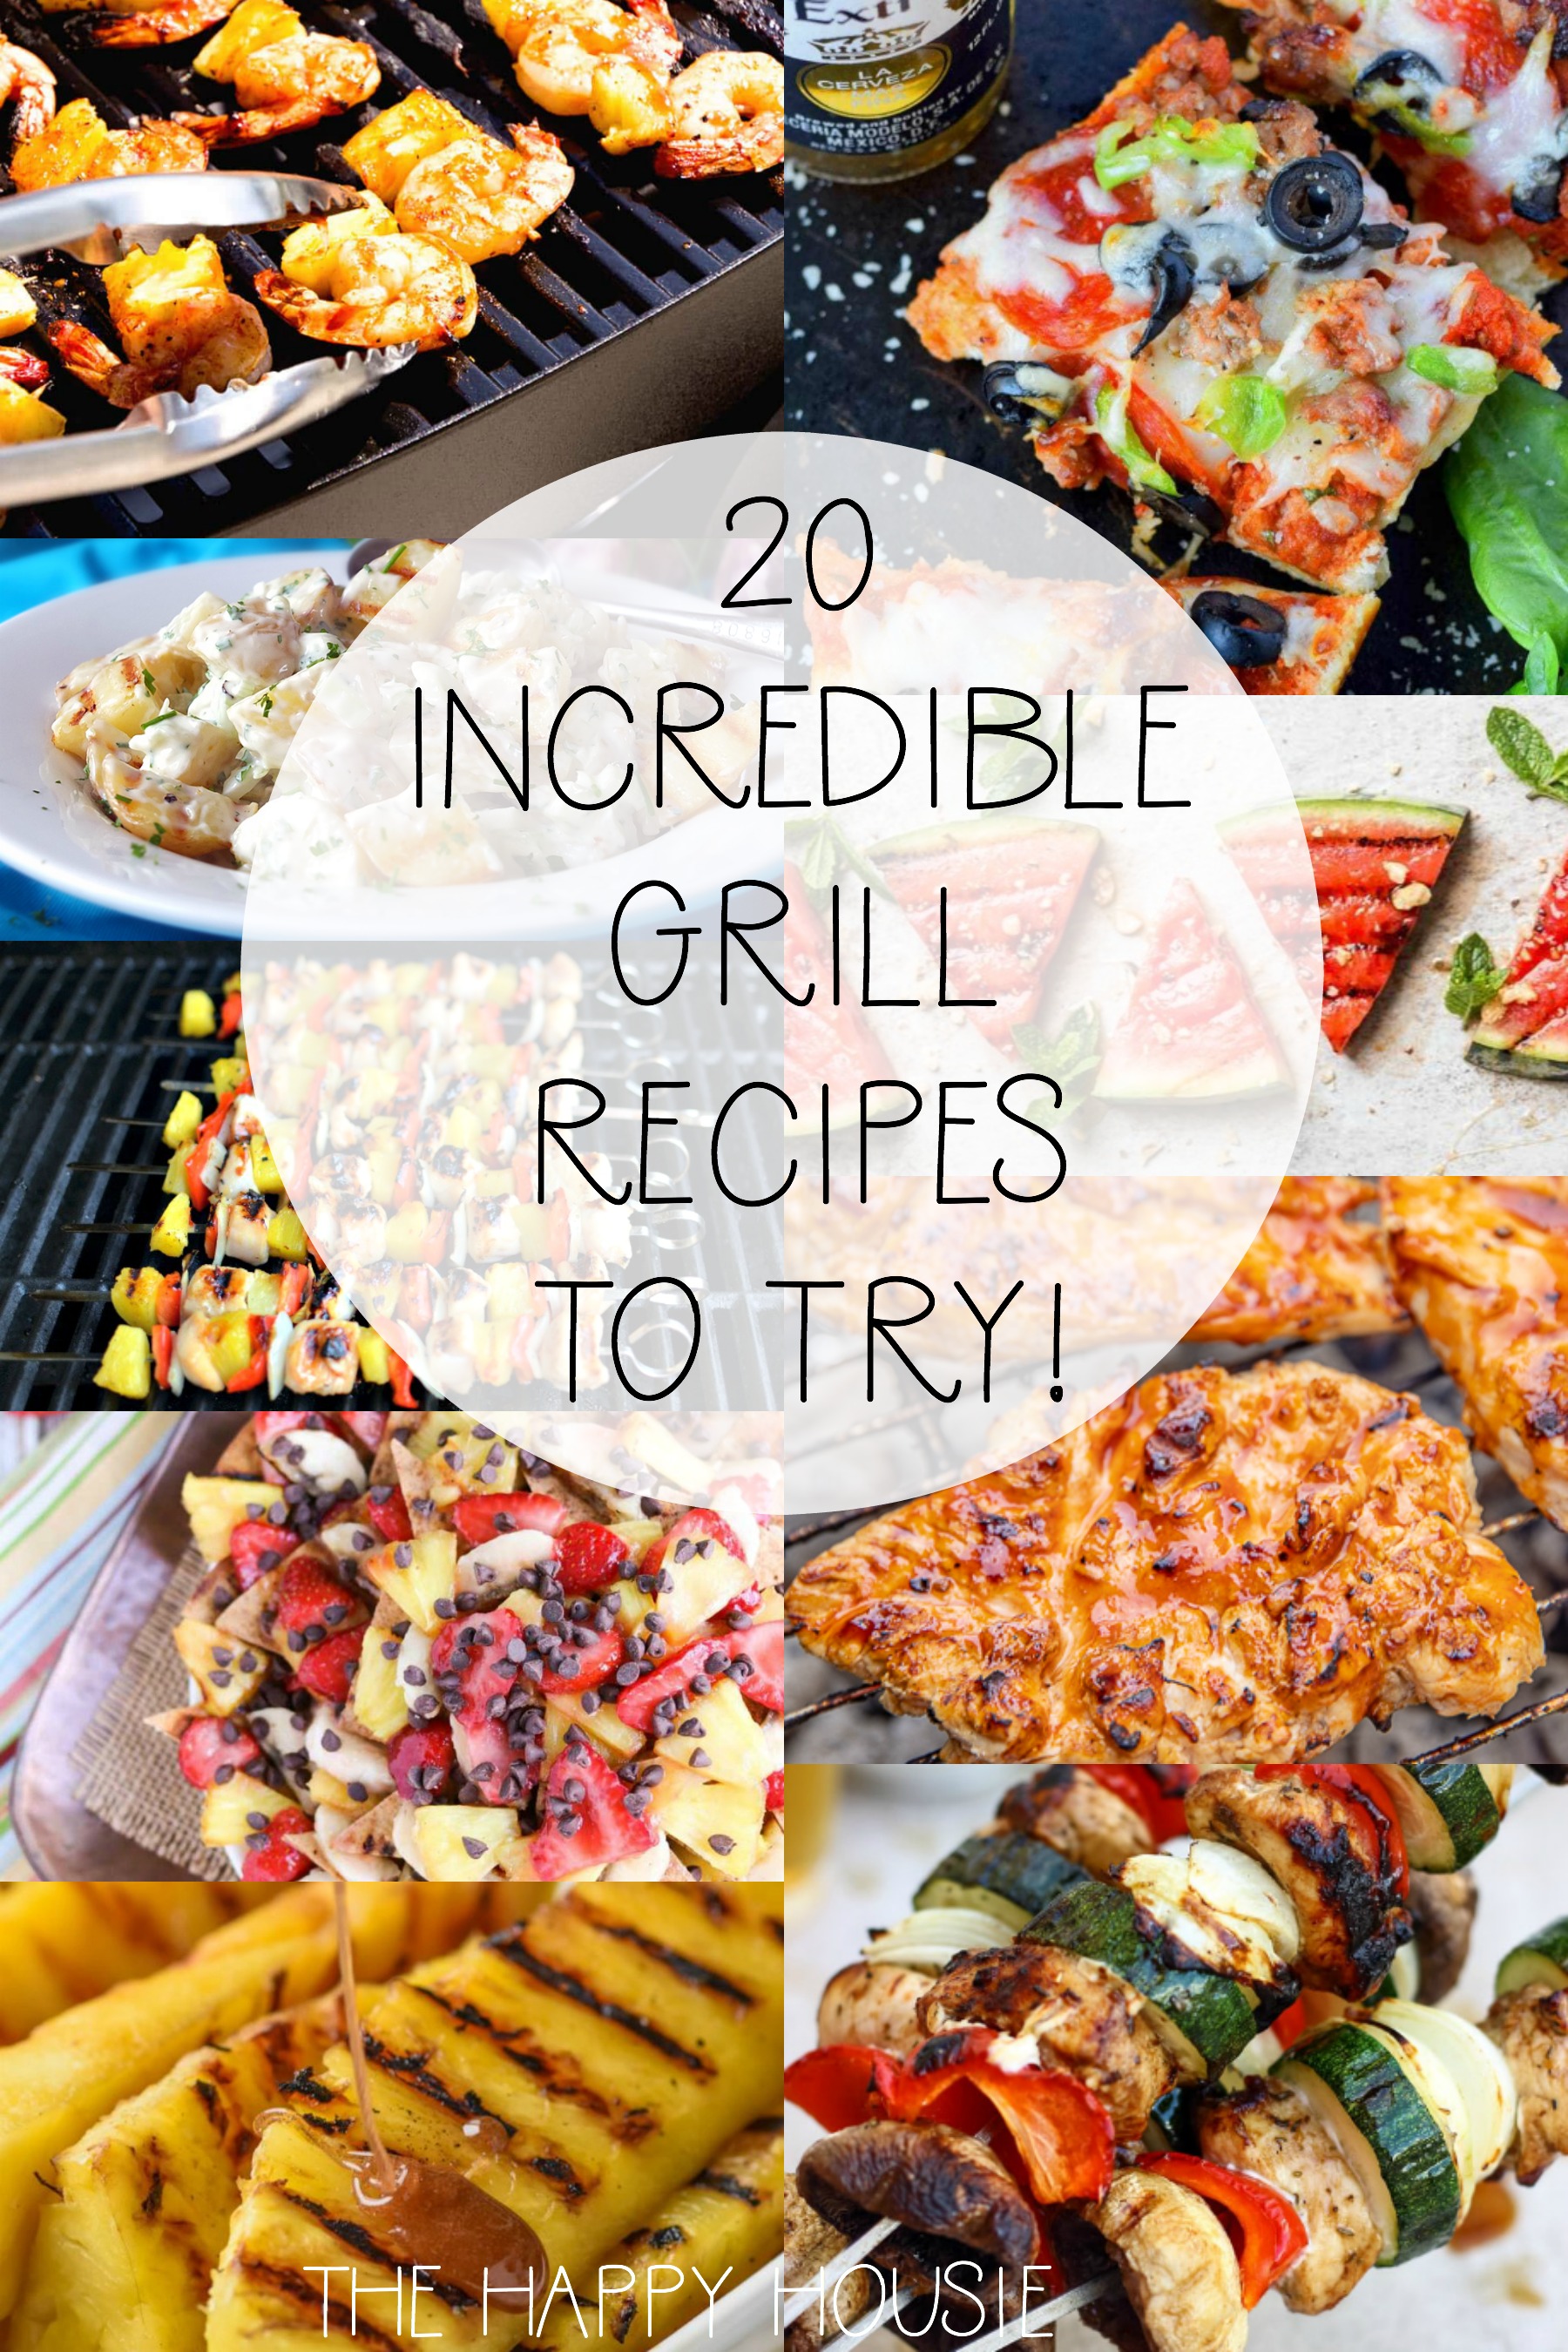 20 grilled recipes to try graphic.